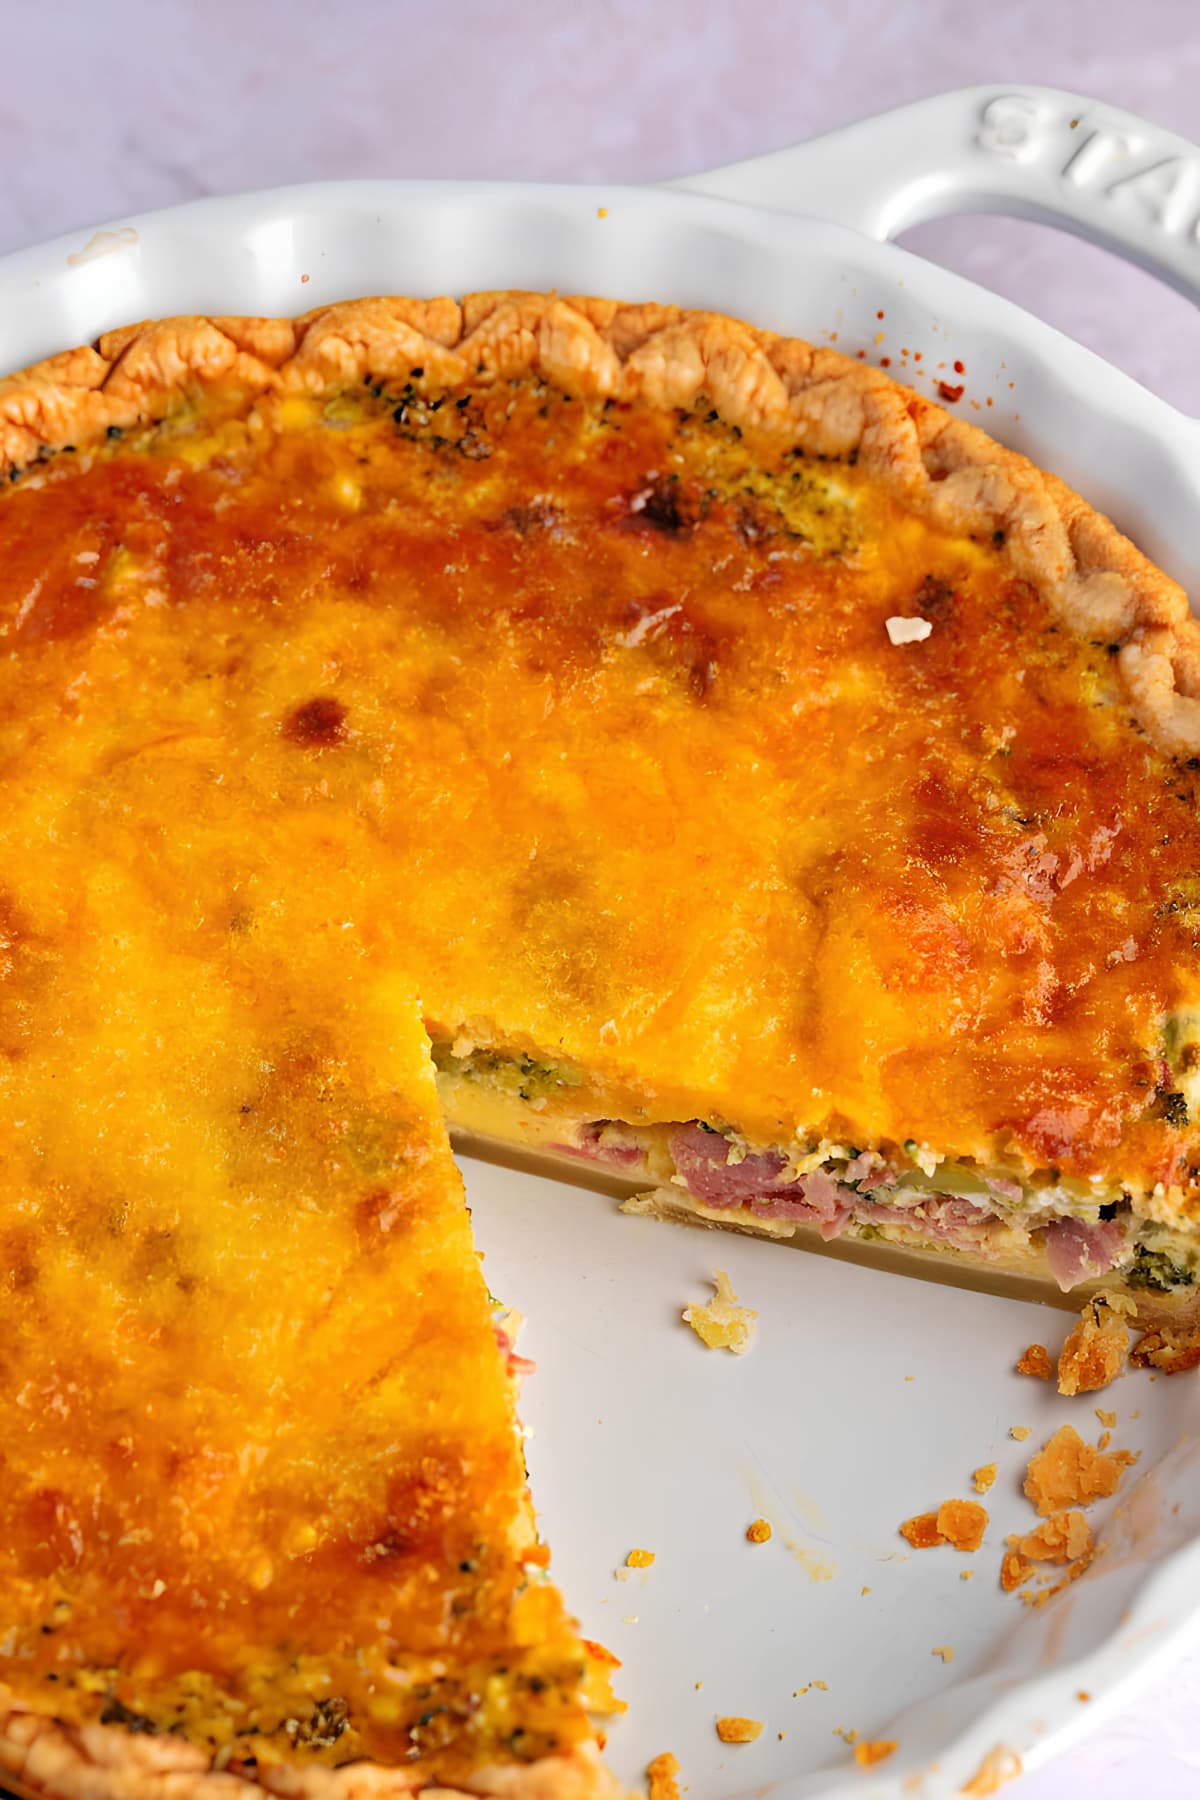 Warm Homemade Broccoli Cheddar Quiche with Ham and Vegetables